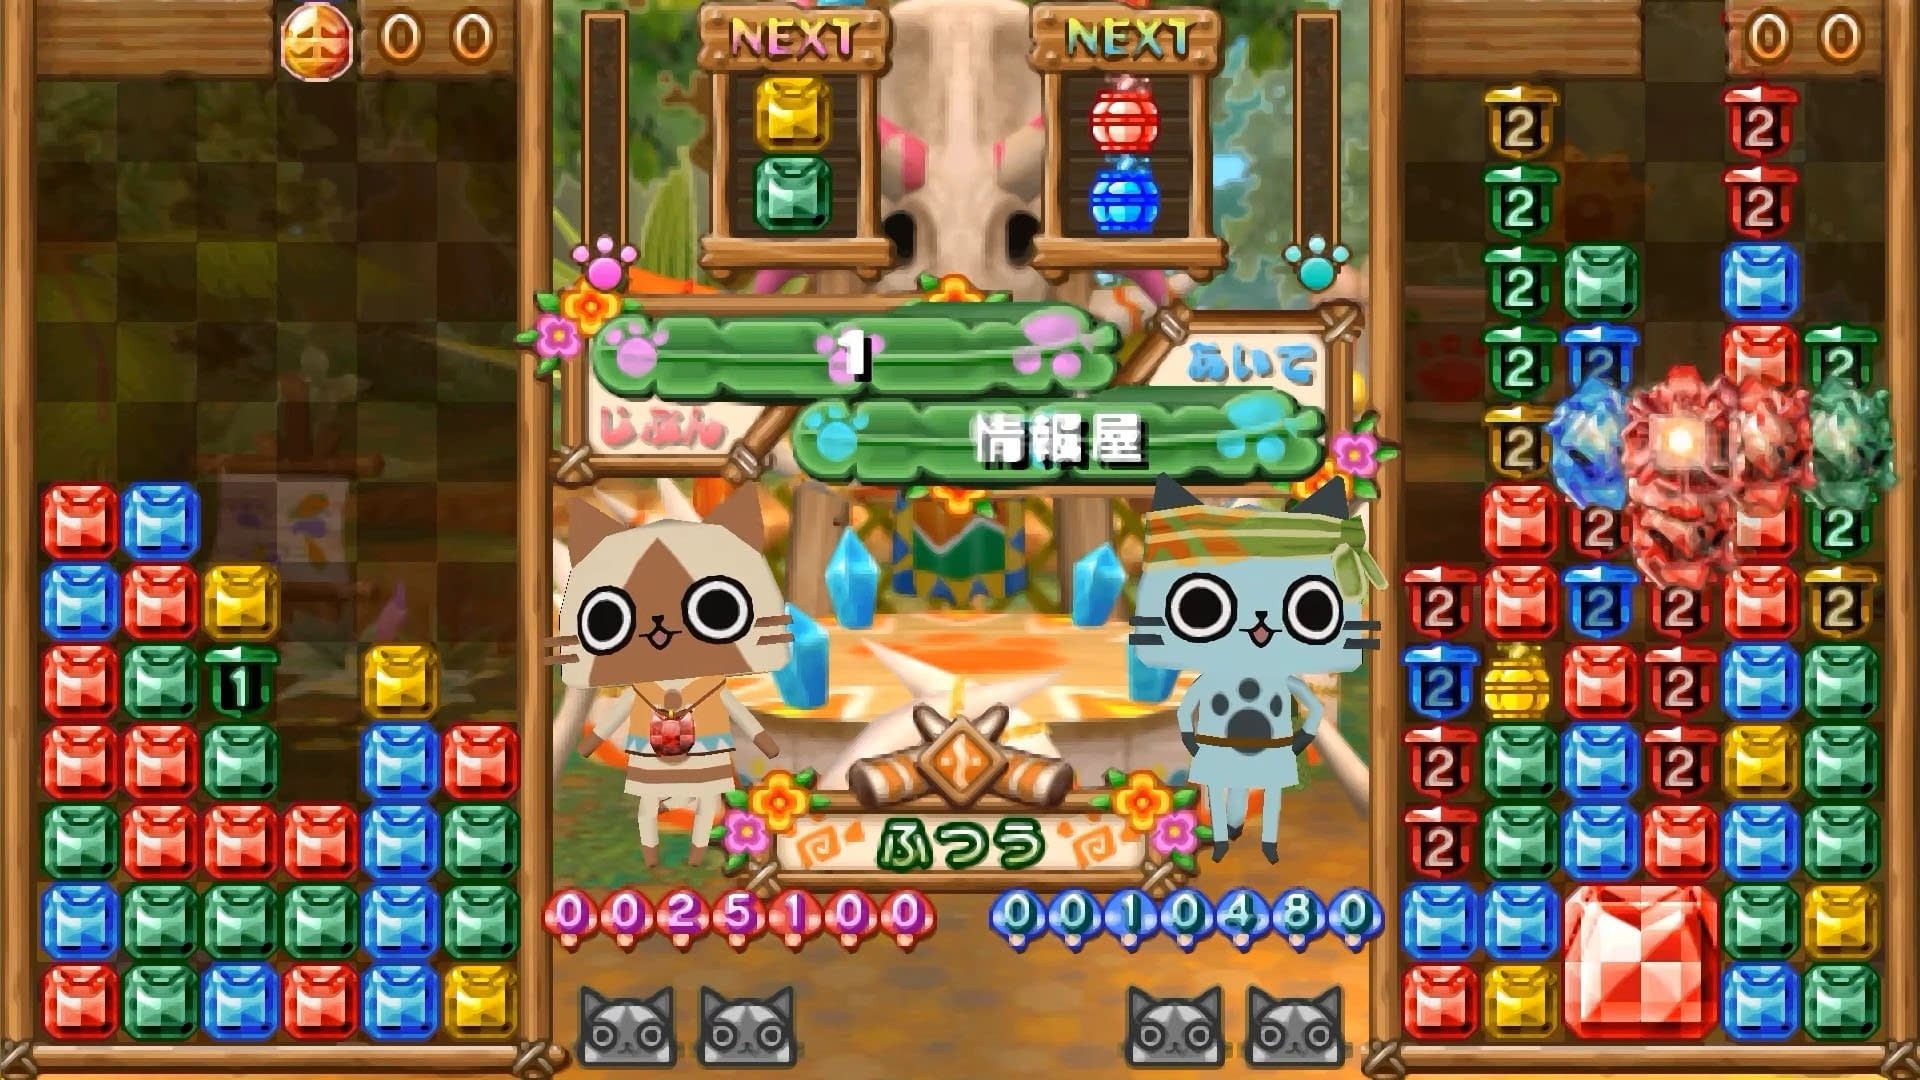 Capcom, Monster Hunter Puzzles: Felyne Isles purchased their name rights